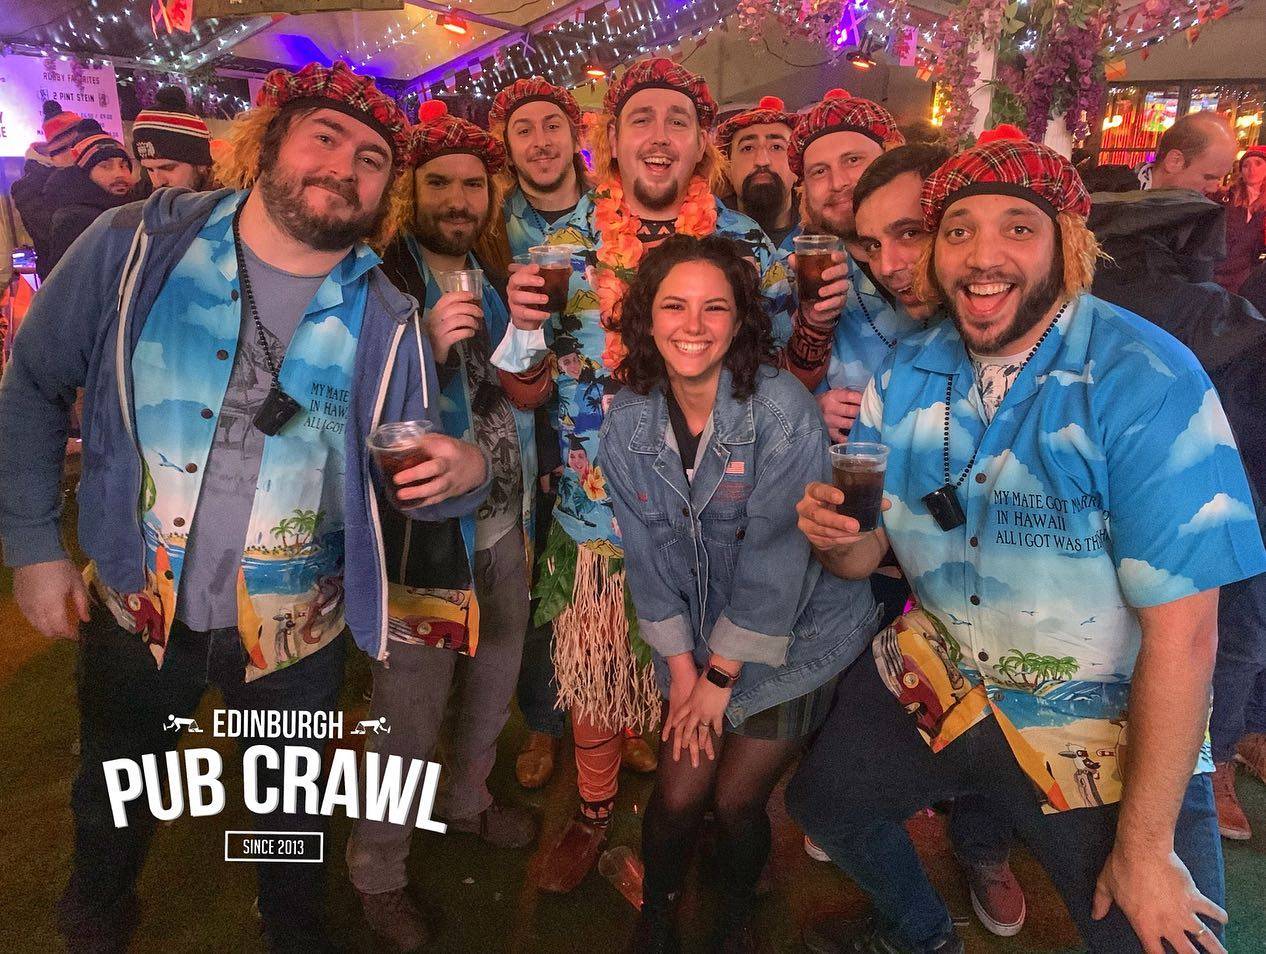 Group of people wearing funny hats and shirts taking part in Edinburgh Pub Crawl